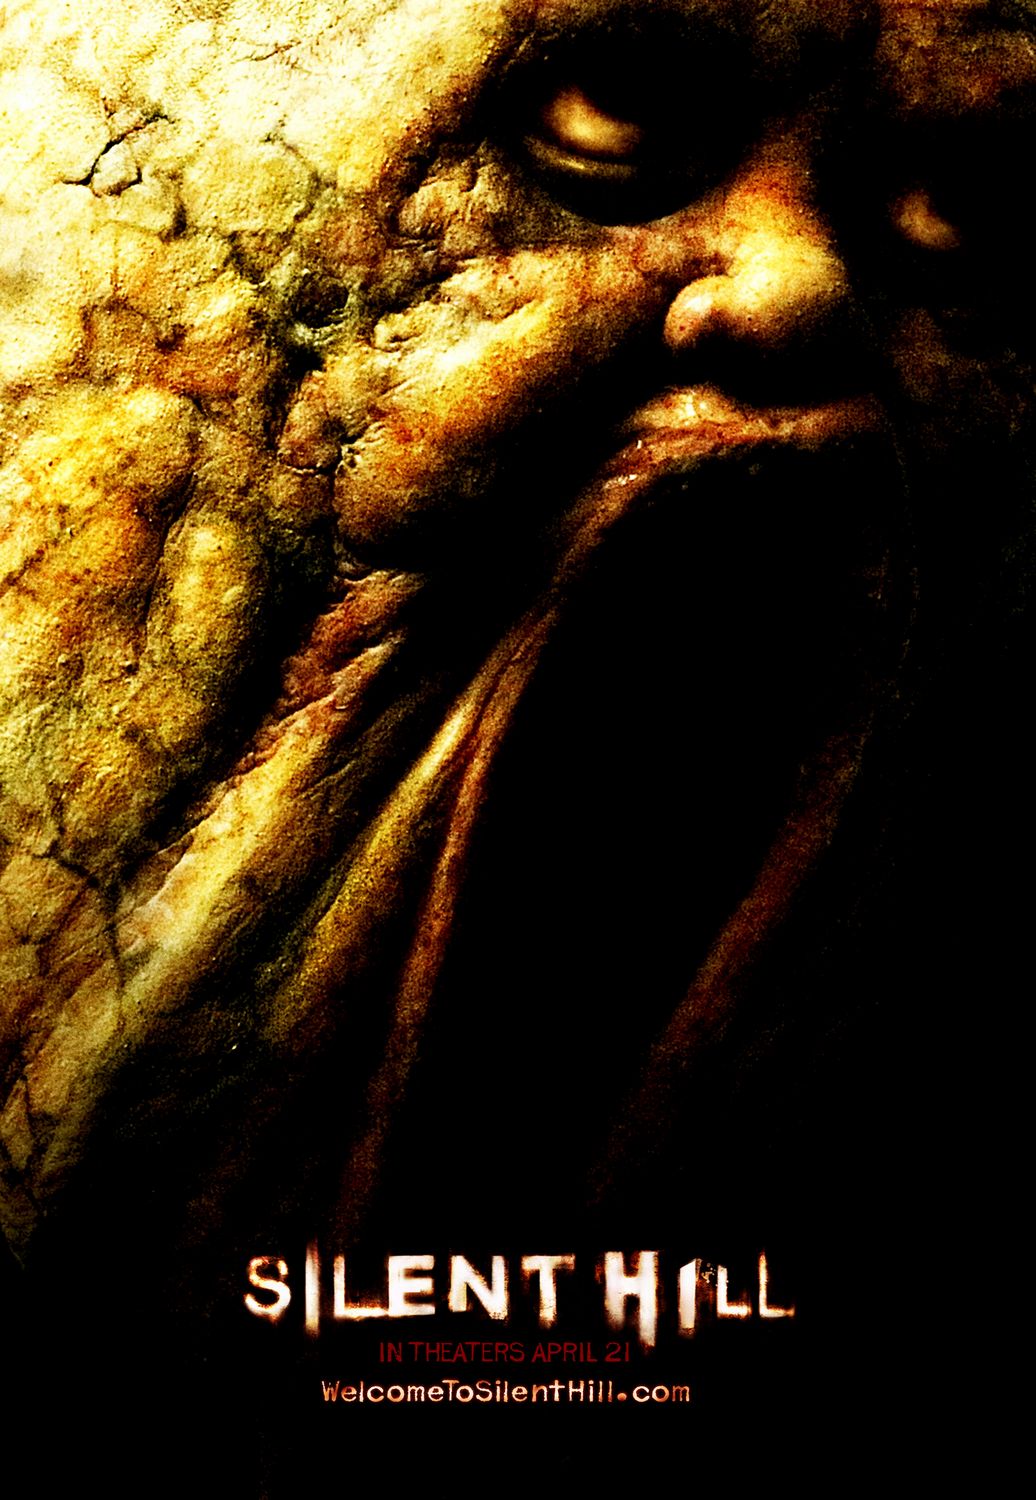 Extra Large Movie Poster Image for Silent Hill (#7 of 11)